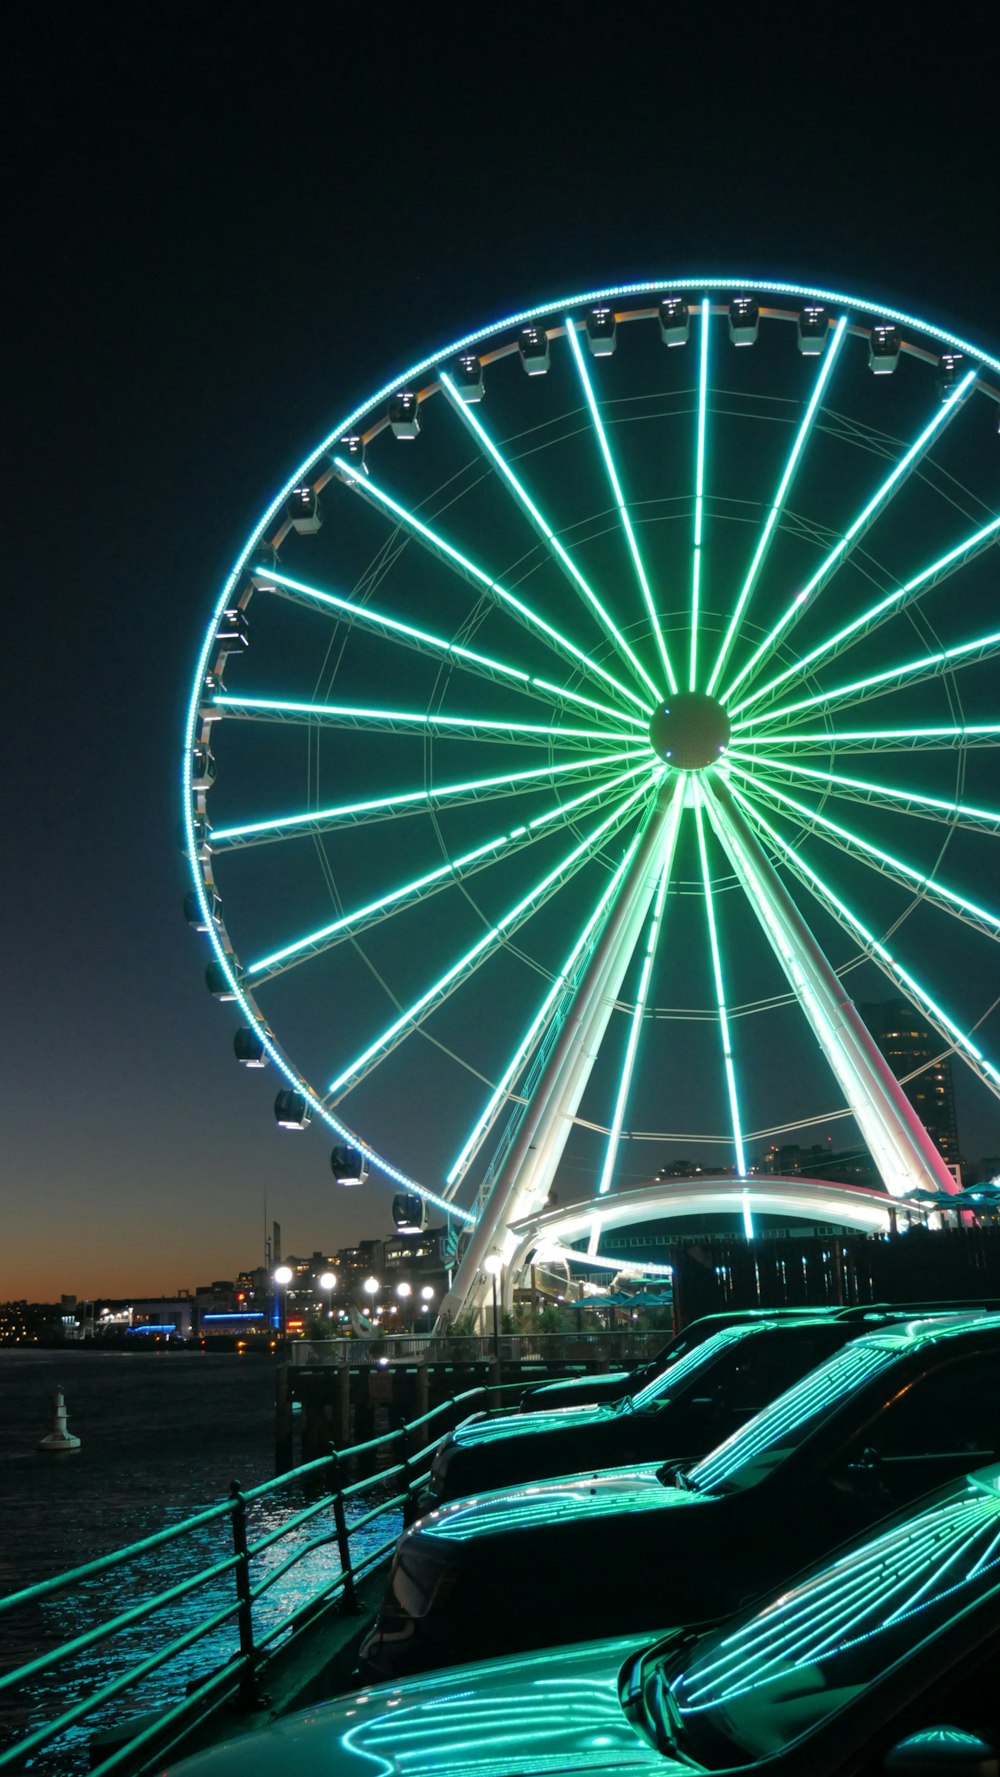 blue and white ferris wheel during night time